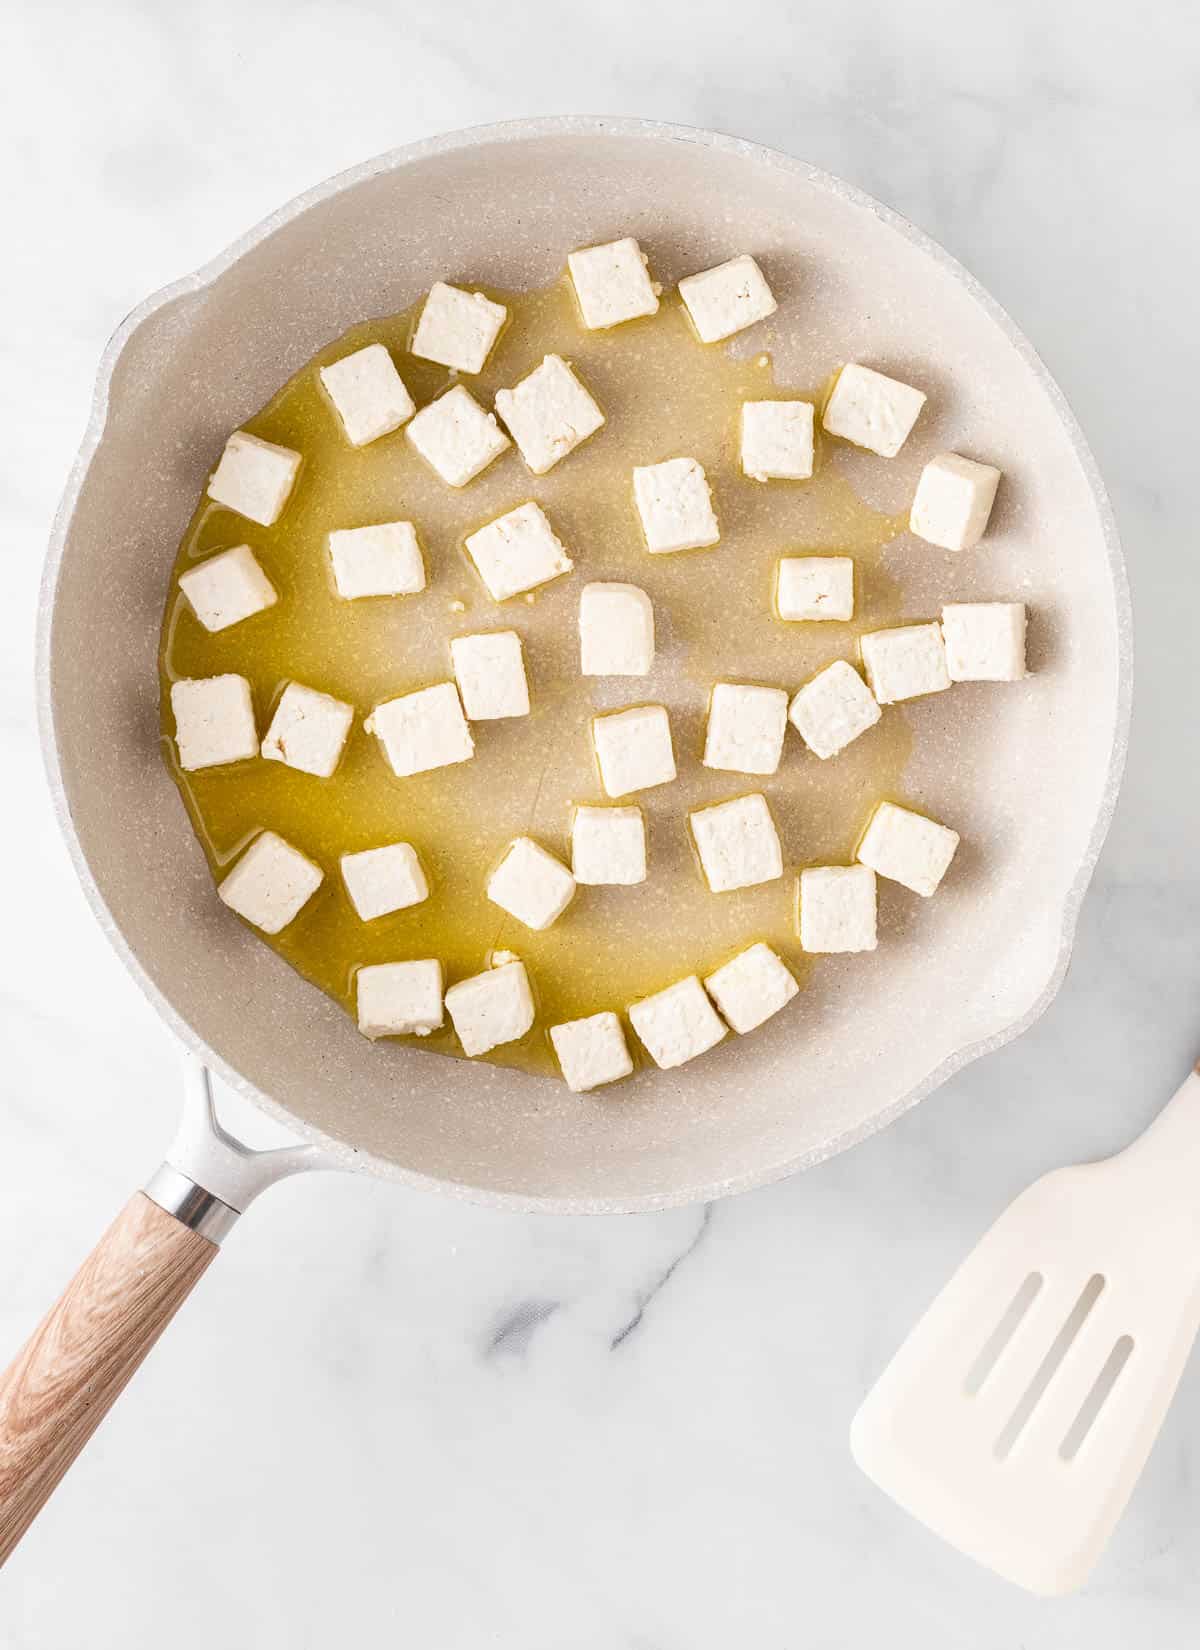 adding the tofu to the skillet with oil